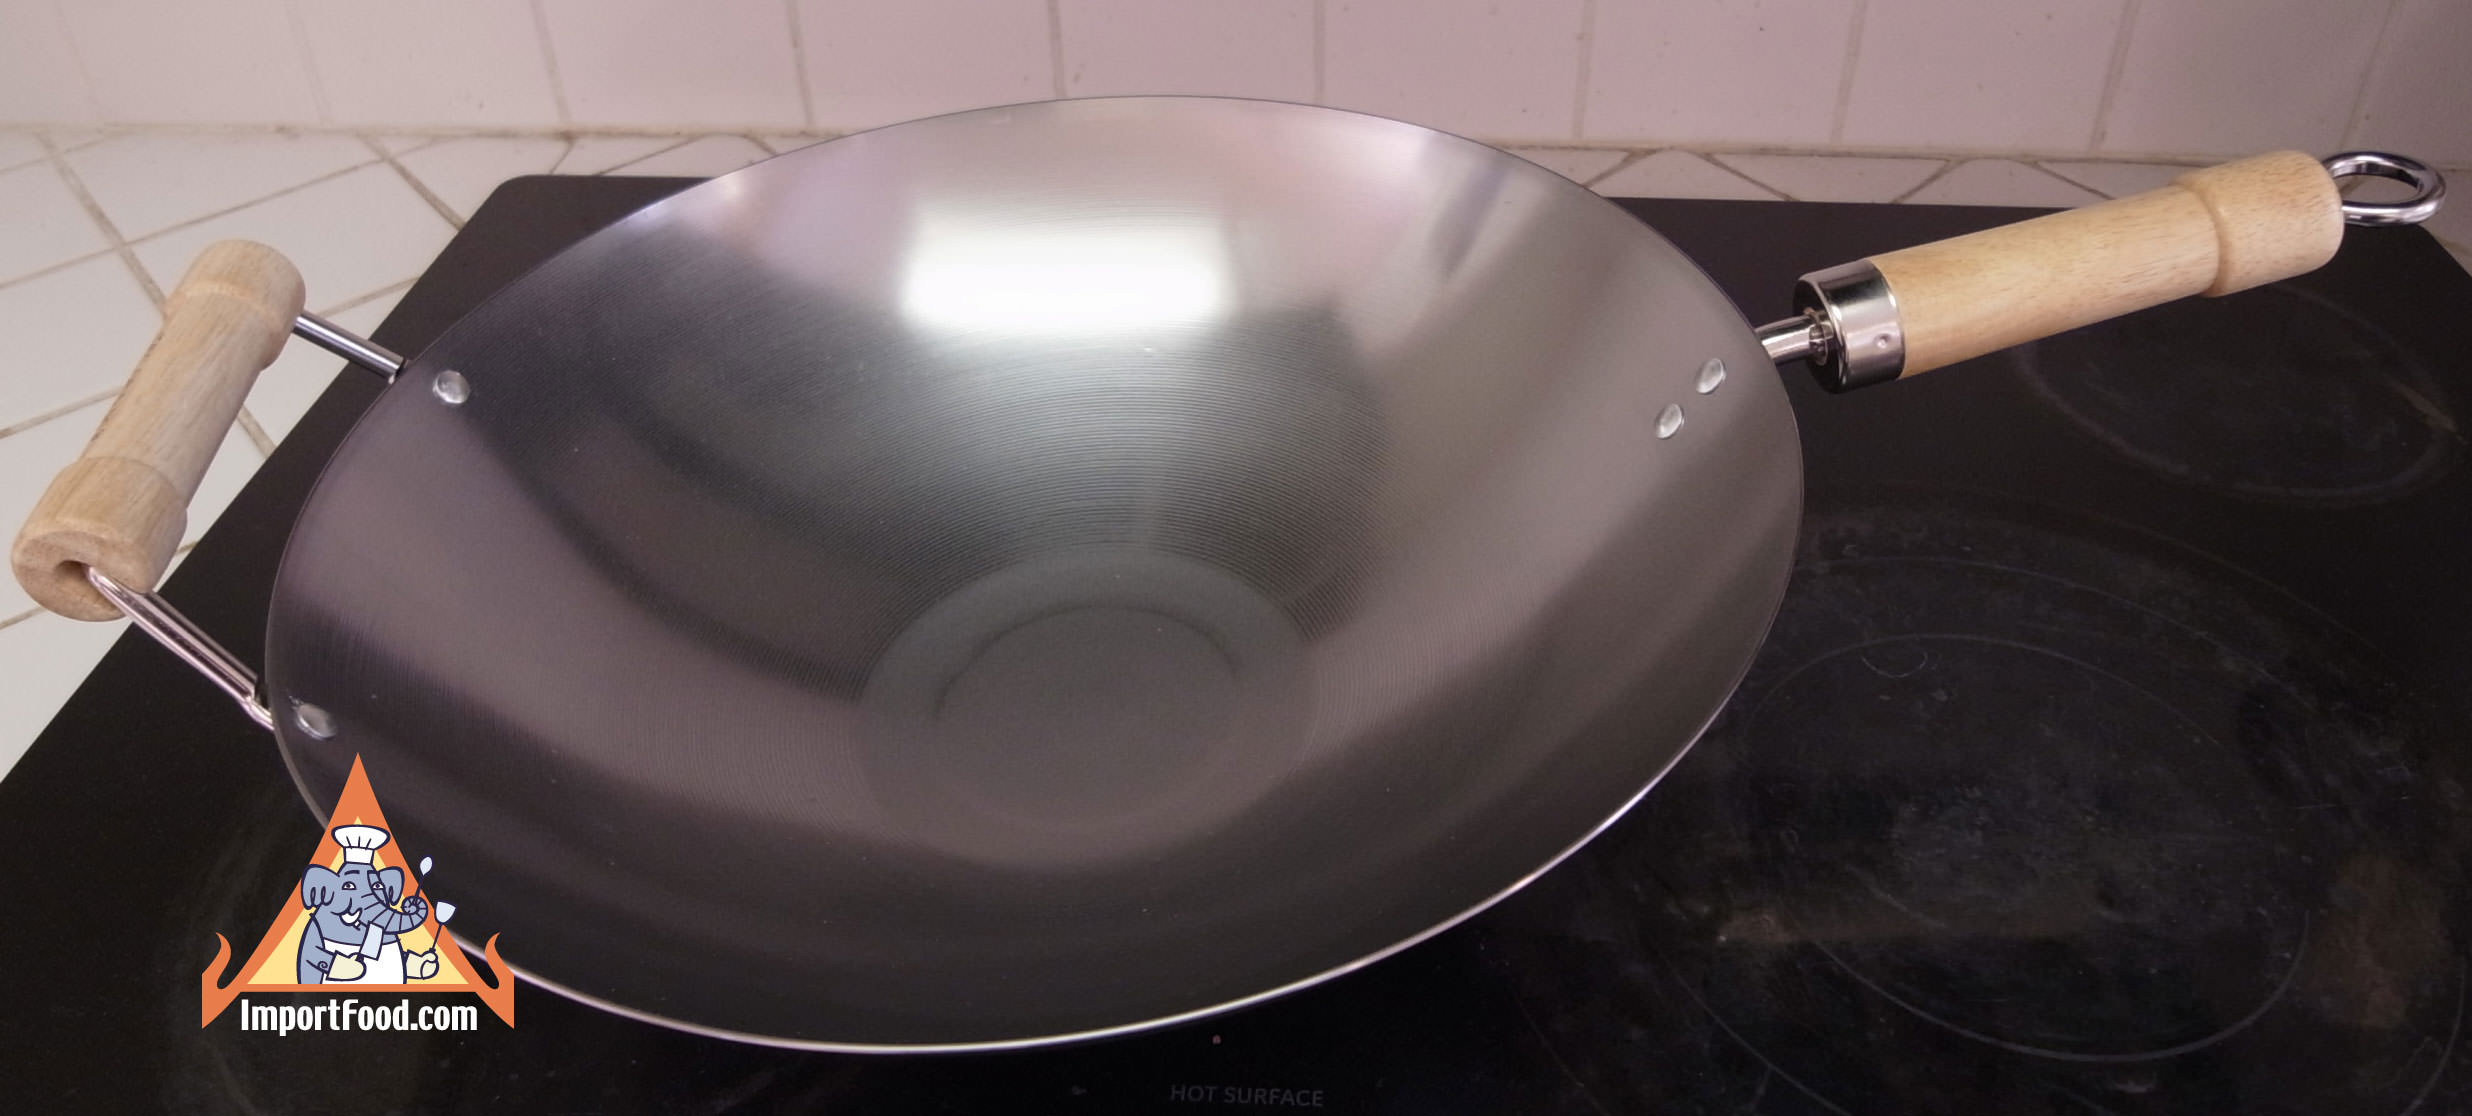 Thai-Style Wok for American Kitchens, 14 inch